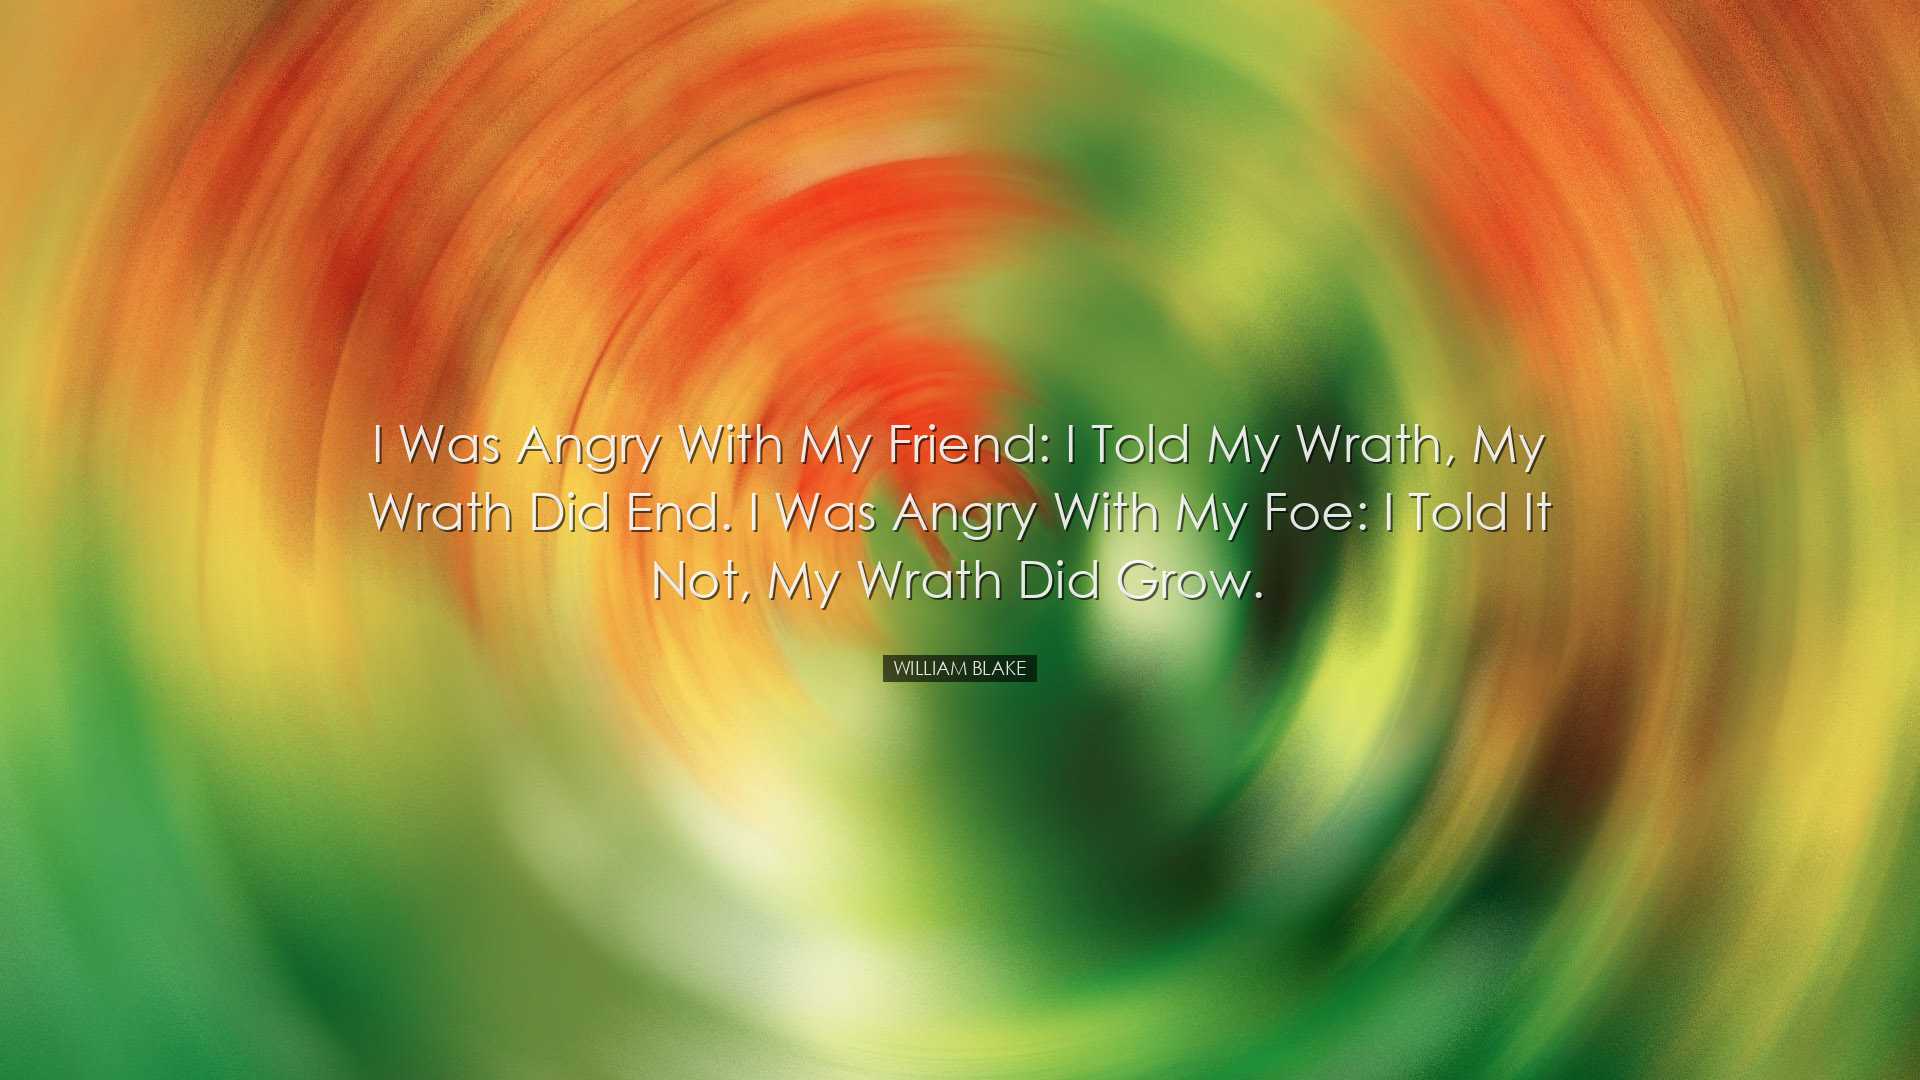 I was angry with my friend: I told my wrath, my wrath did end. I w